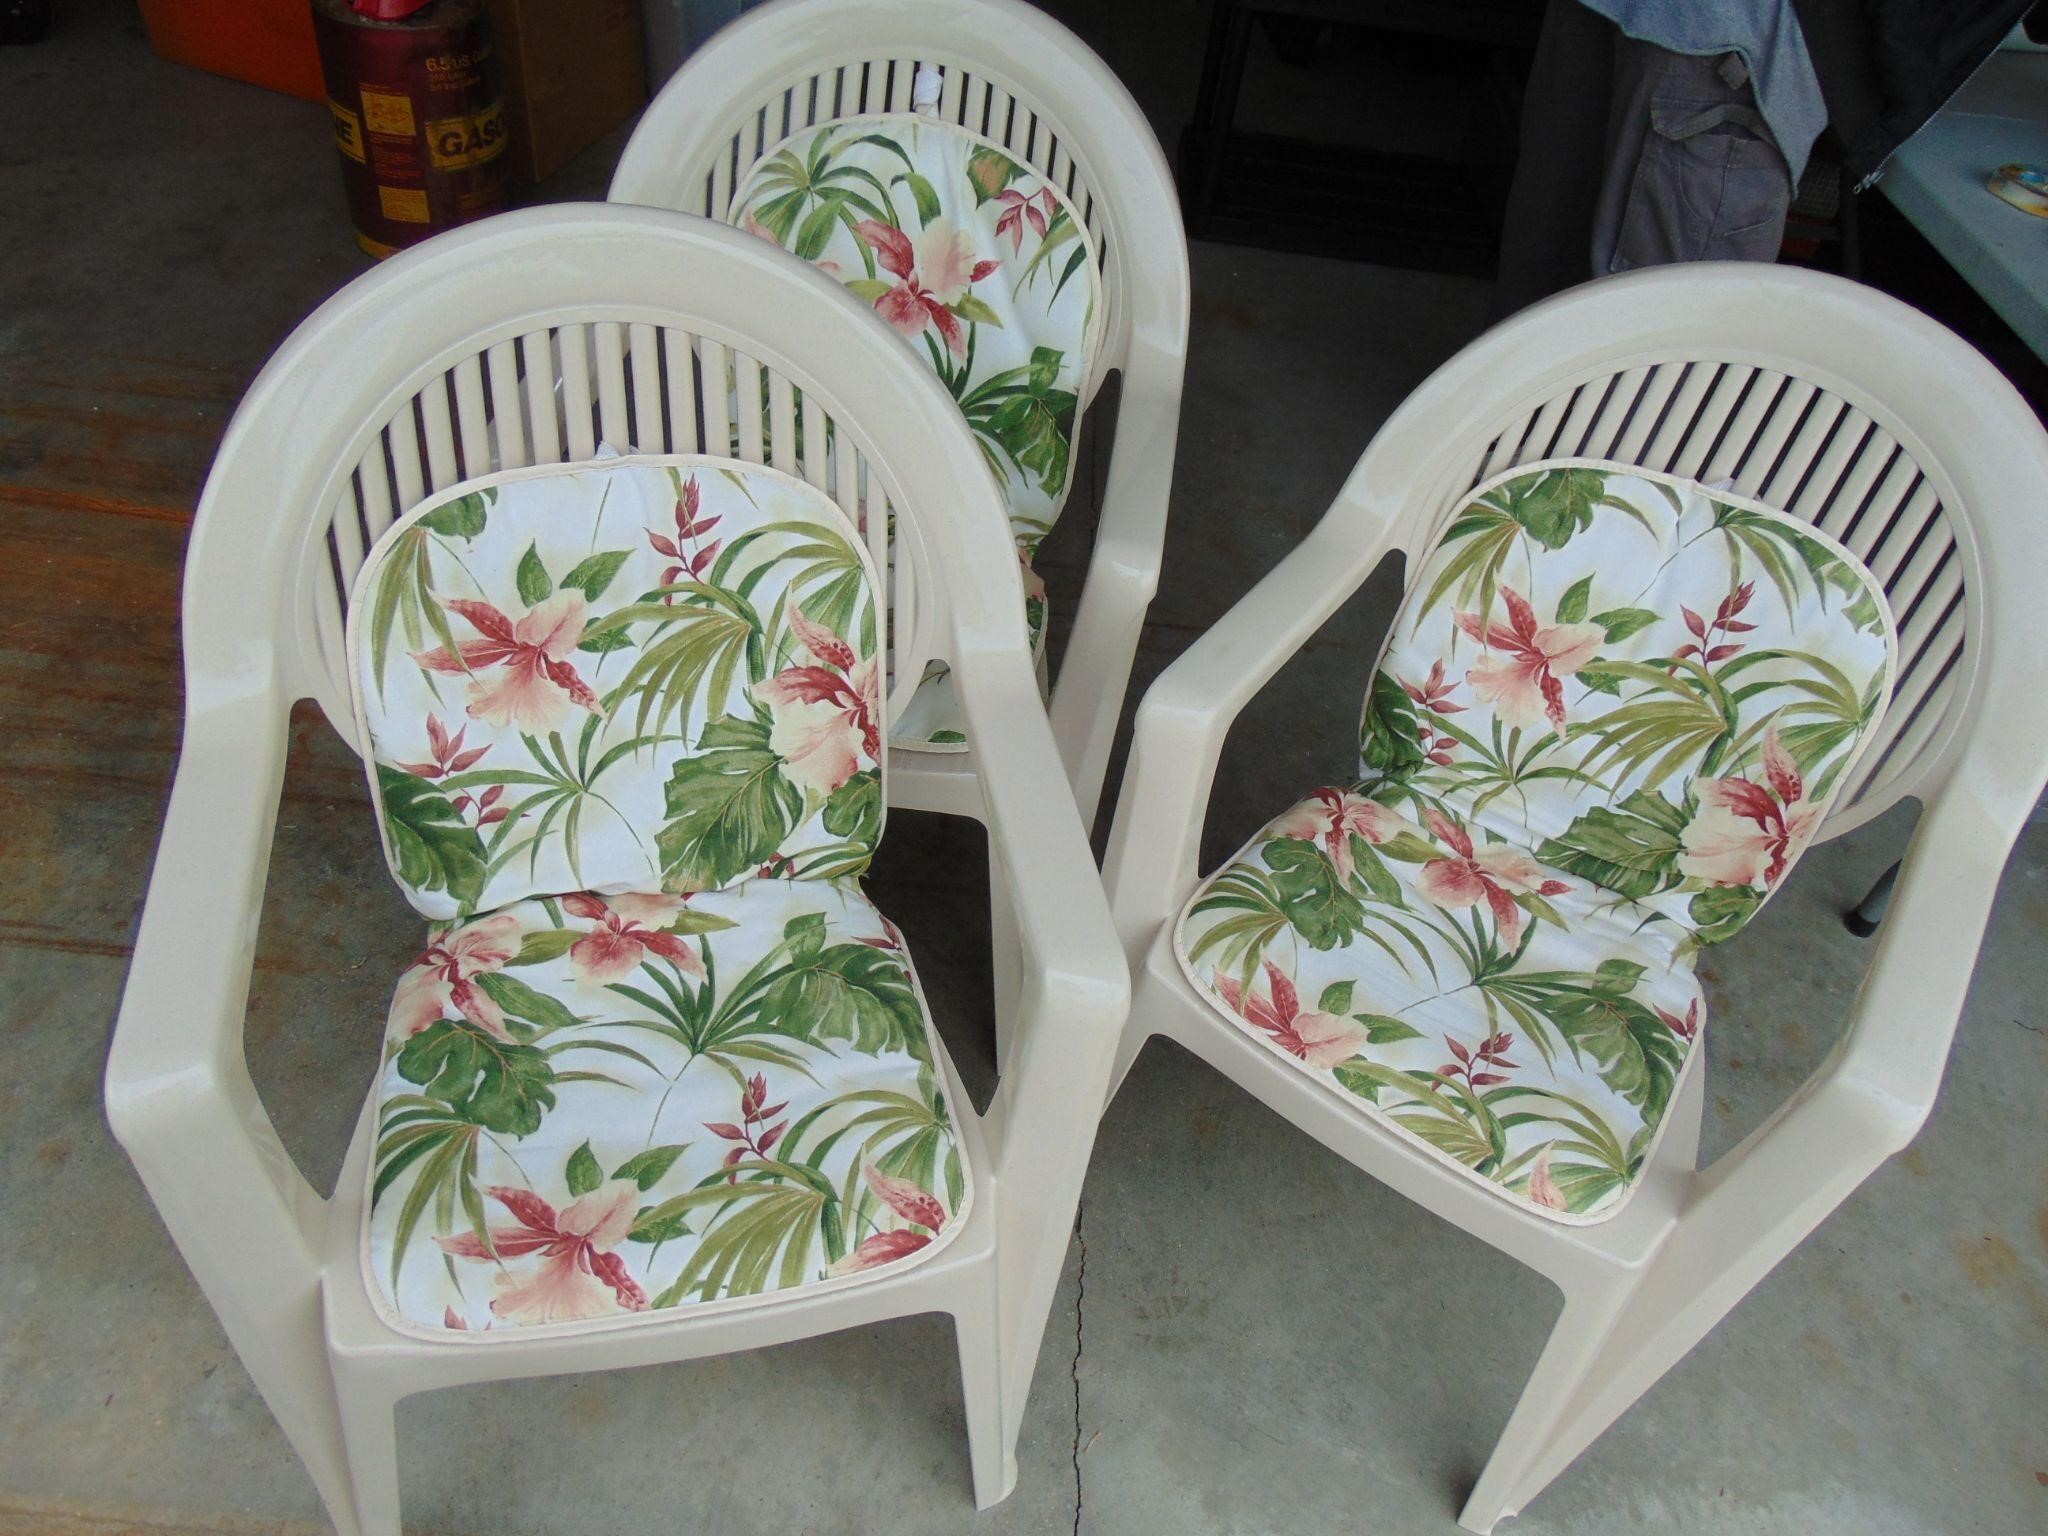 Three Plastic Chairs with Cushions